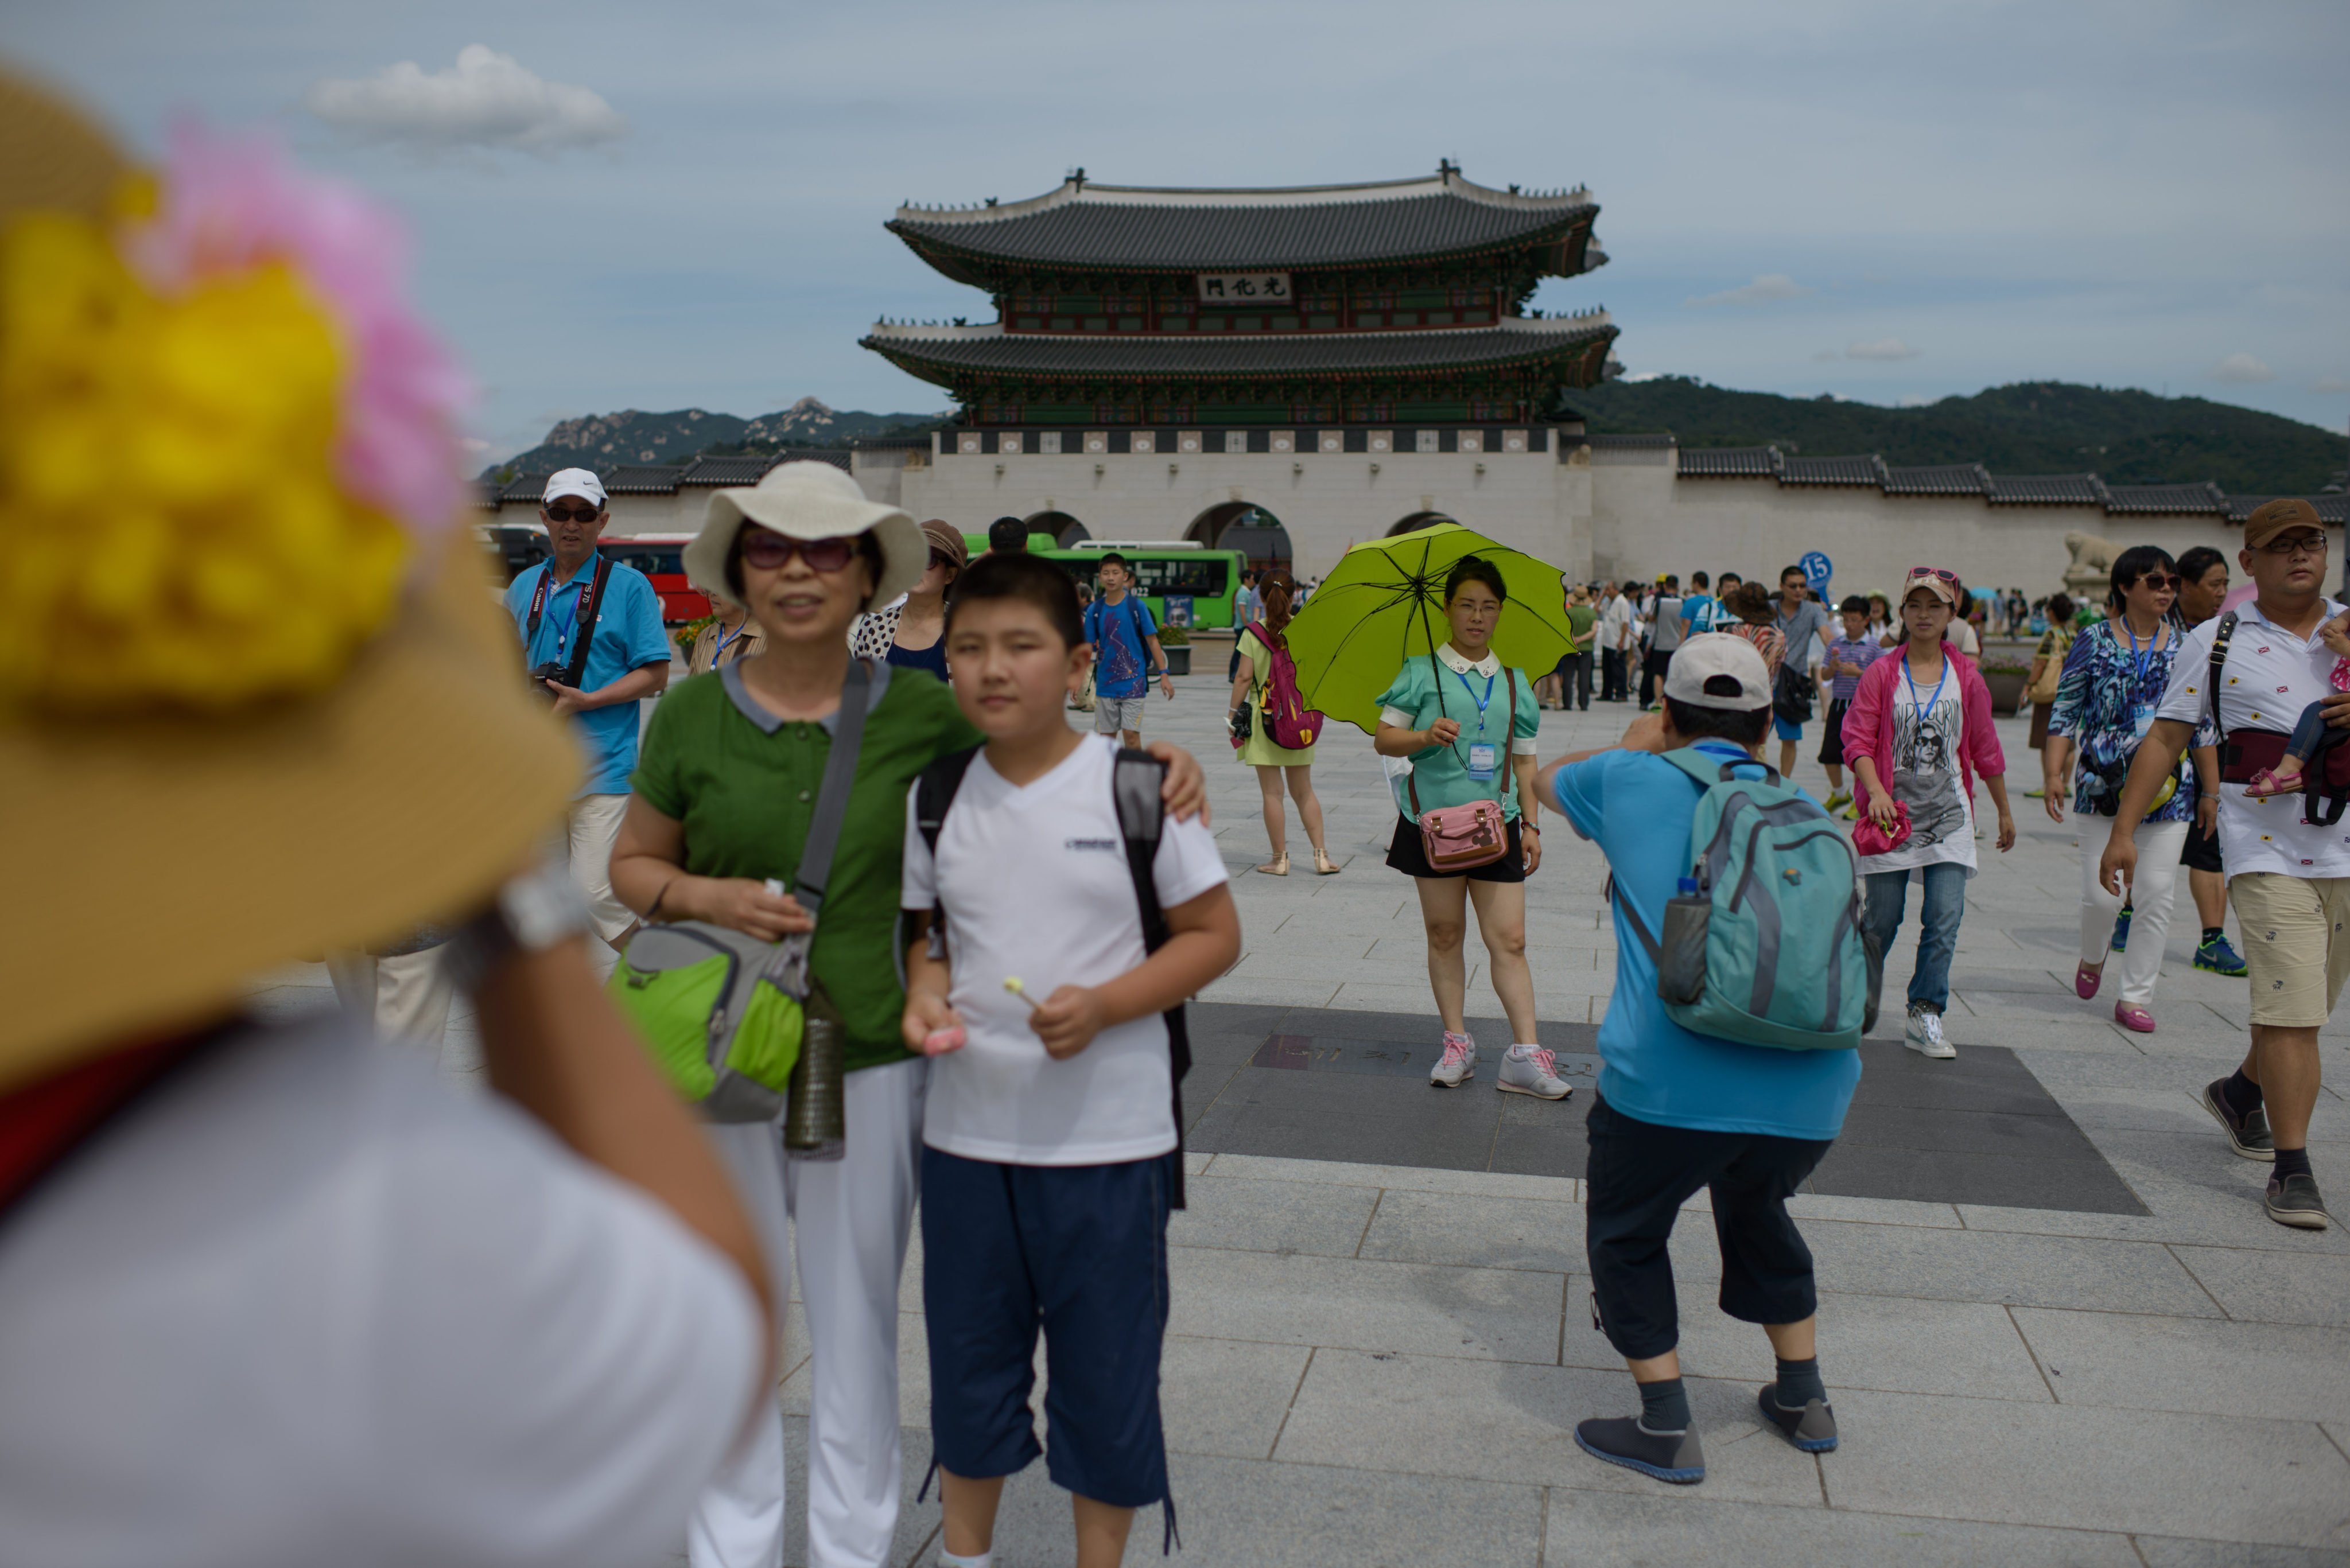 Tourists from China pose for photos before the Gyeongbokgung Palace in Seoul, South Korea, on August 27, 2014. The two countries should promote avenues for direct interaction such as tourism, academic collaboration and cultural outreach that foster more positive long-term perceptions and greater trust between people. Photo: AFP